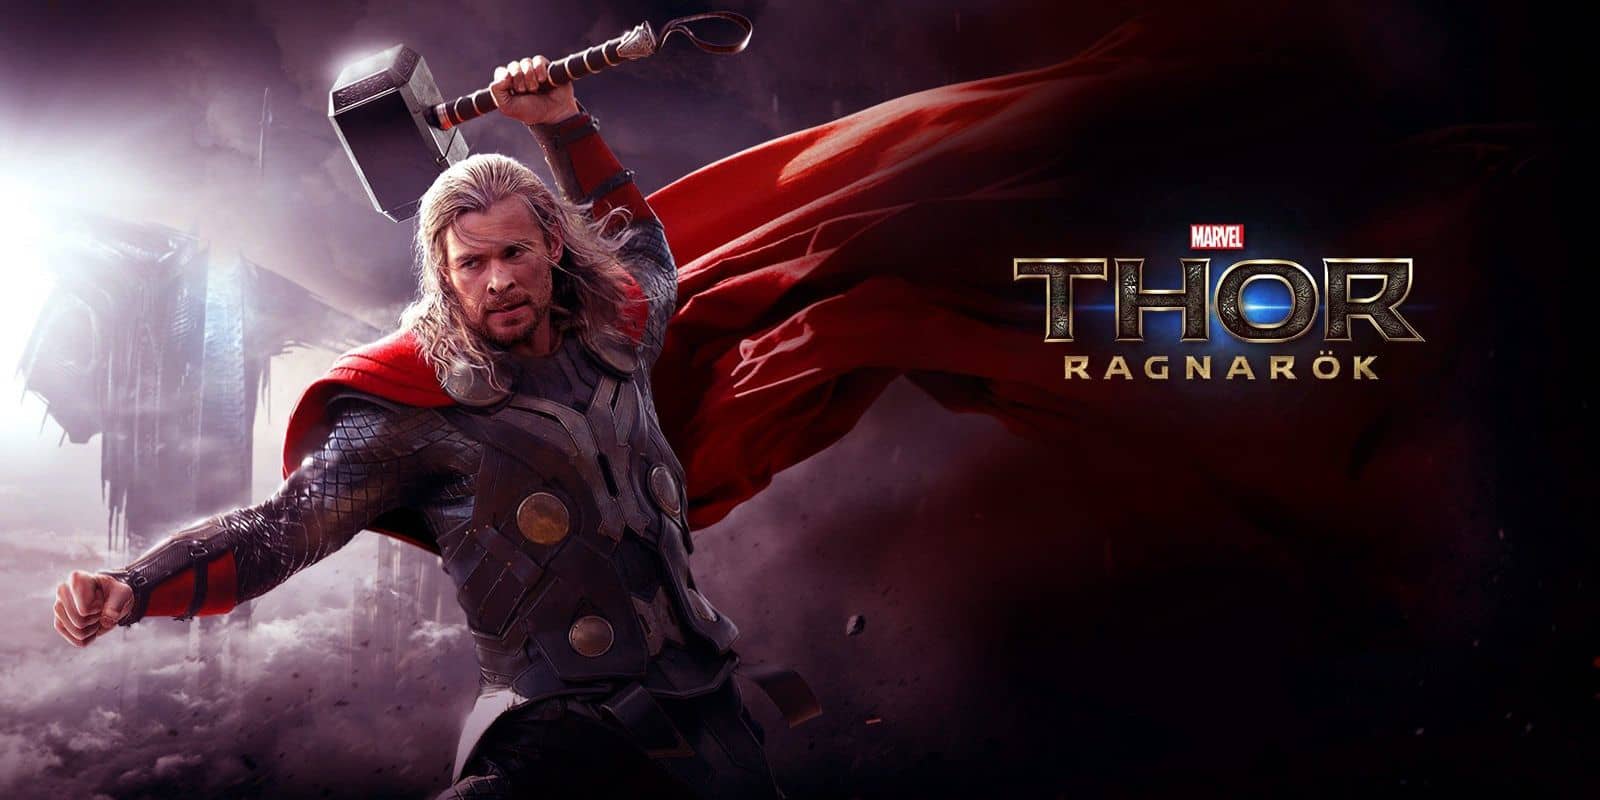 Check Out The First Reveal Of Thor And The Hulk In A Gladiator Battle For Ragnarok